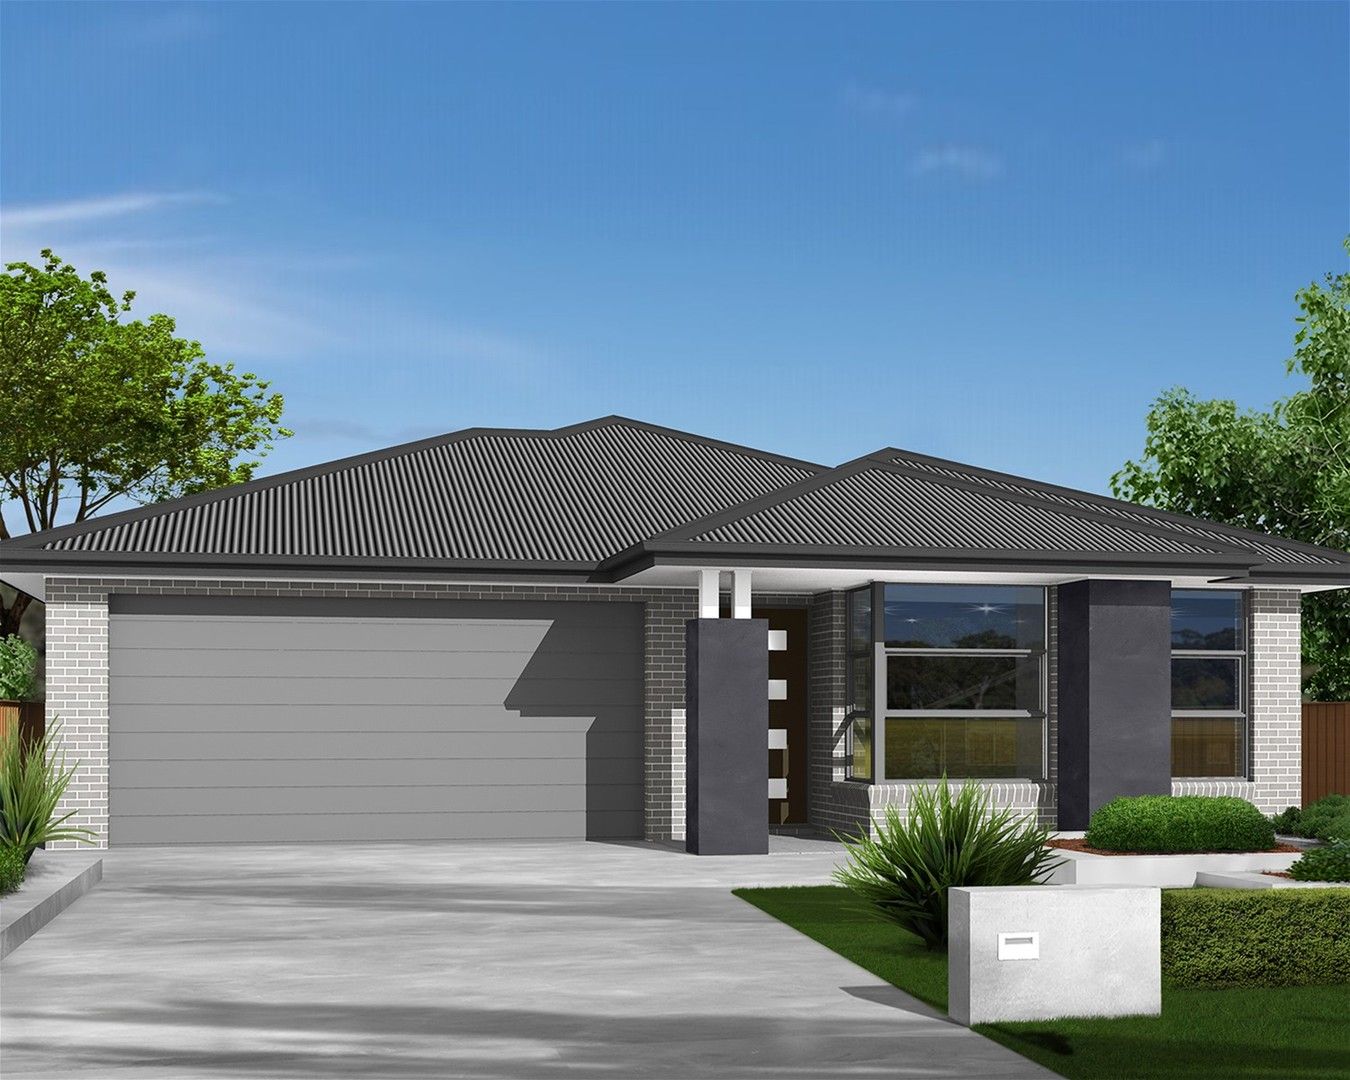 4 bedrooms New House & Land in Lot 55 Rinanna Place ST GEORGES BASIN NSW, 2540